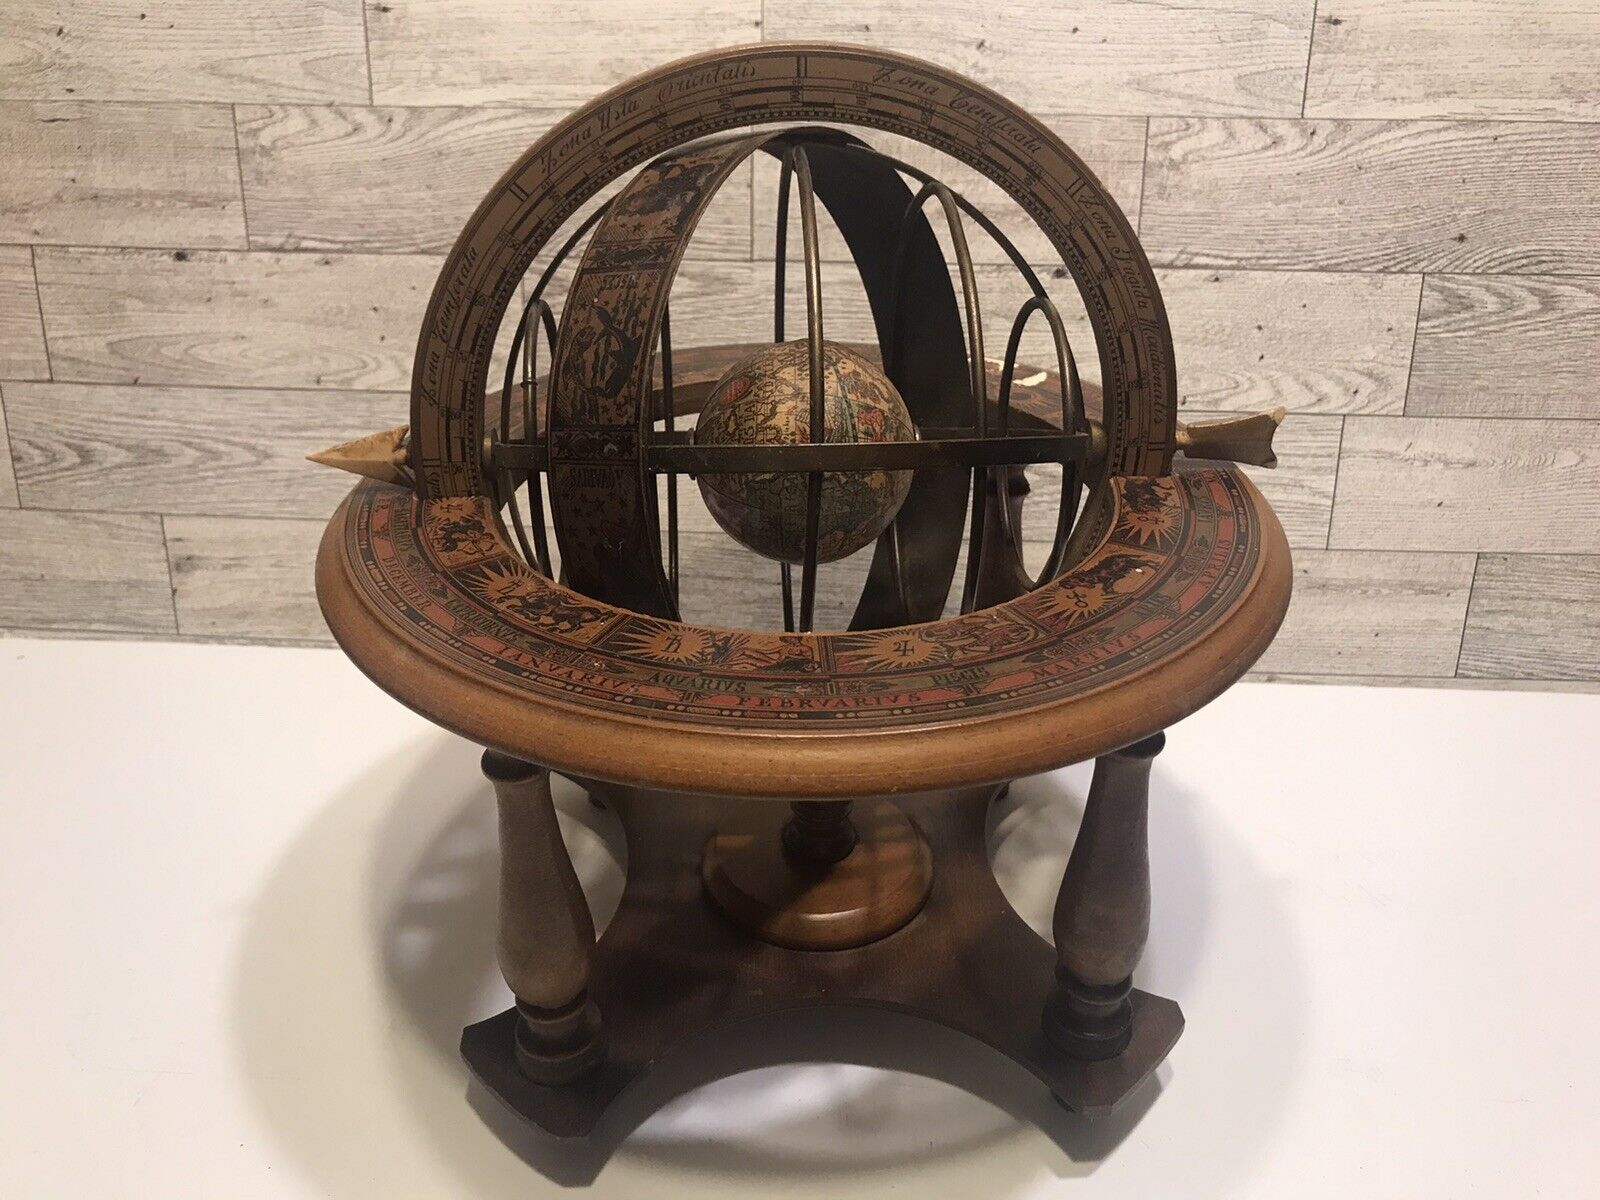 Vintage Sphere Globe in Wooden Stand Nautical Decor Astrology Zodiac Display